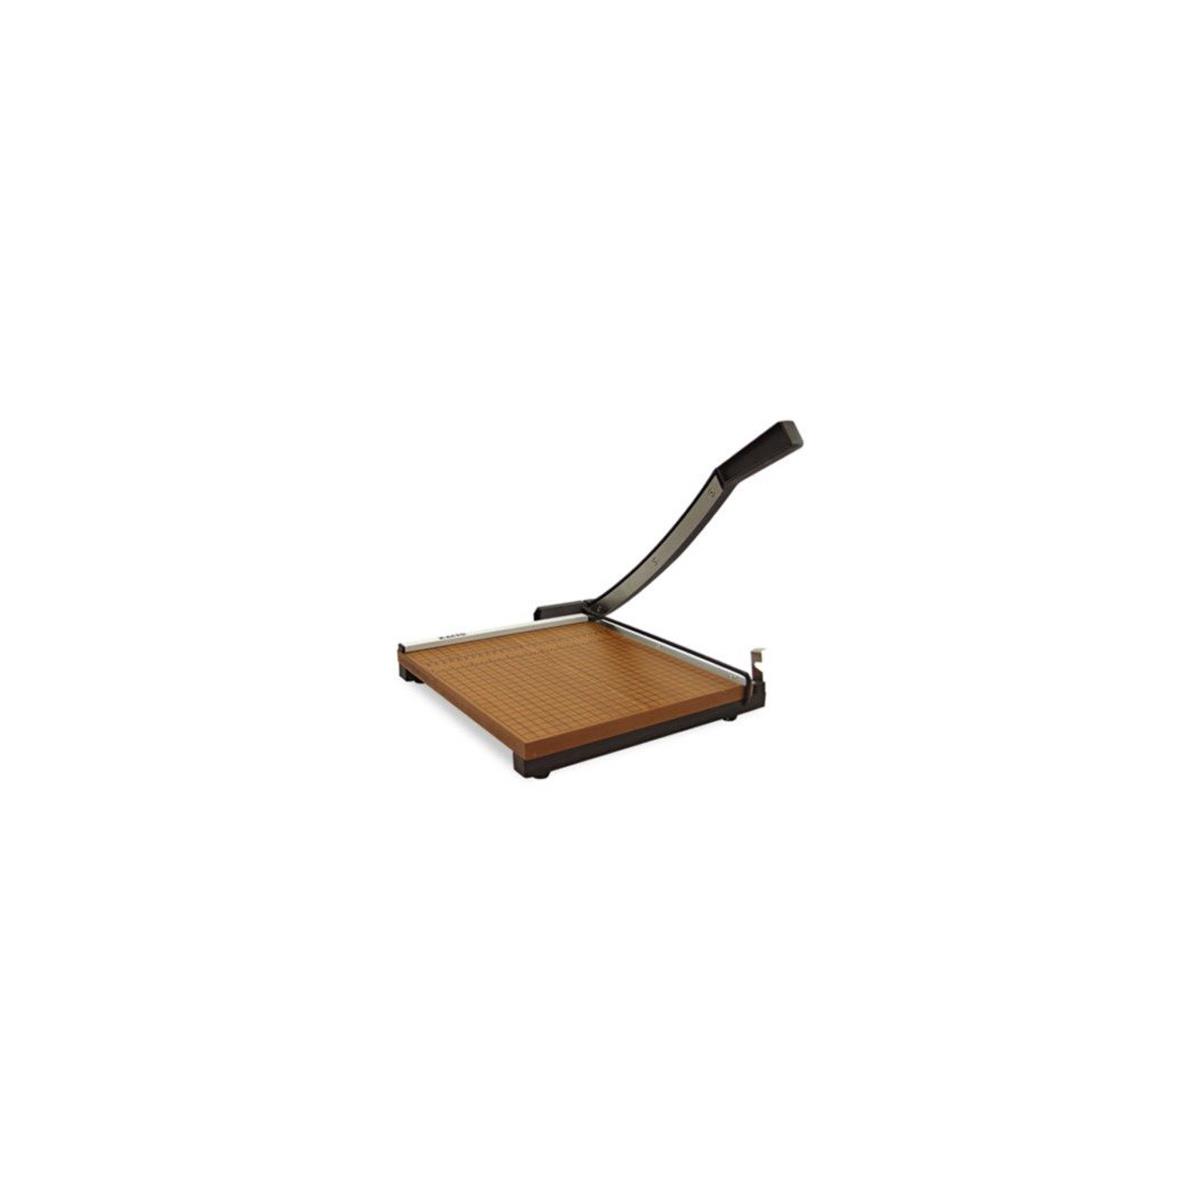 

X-Acto 15x15" Guillotine Square Trimmer - Wood base